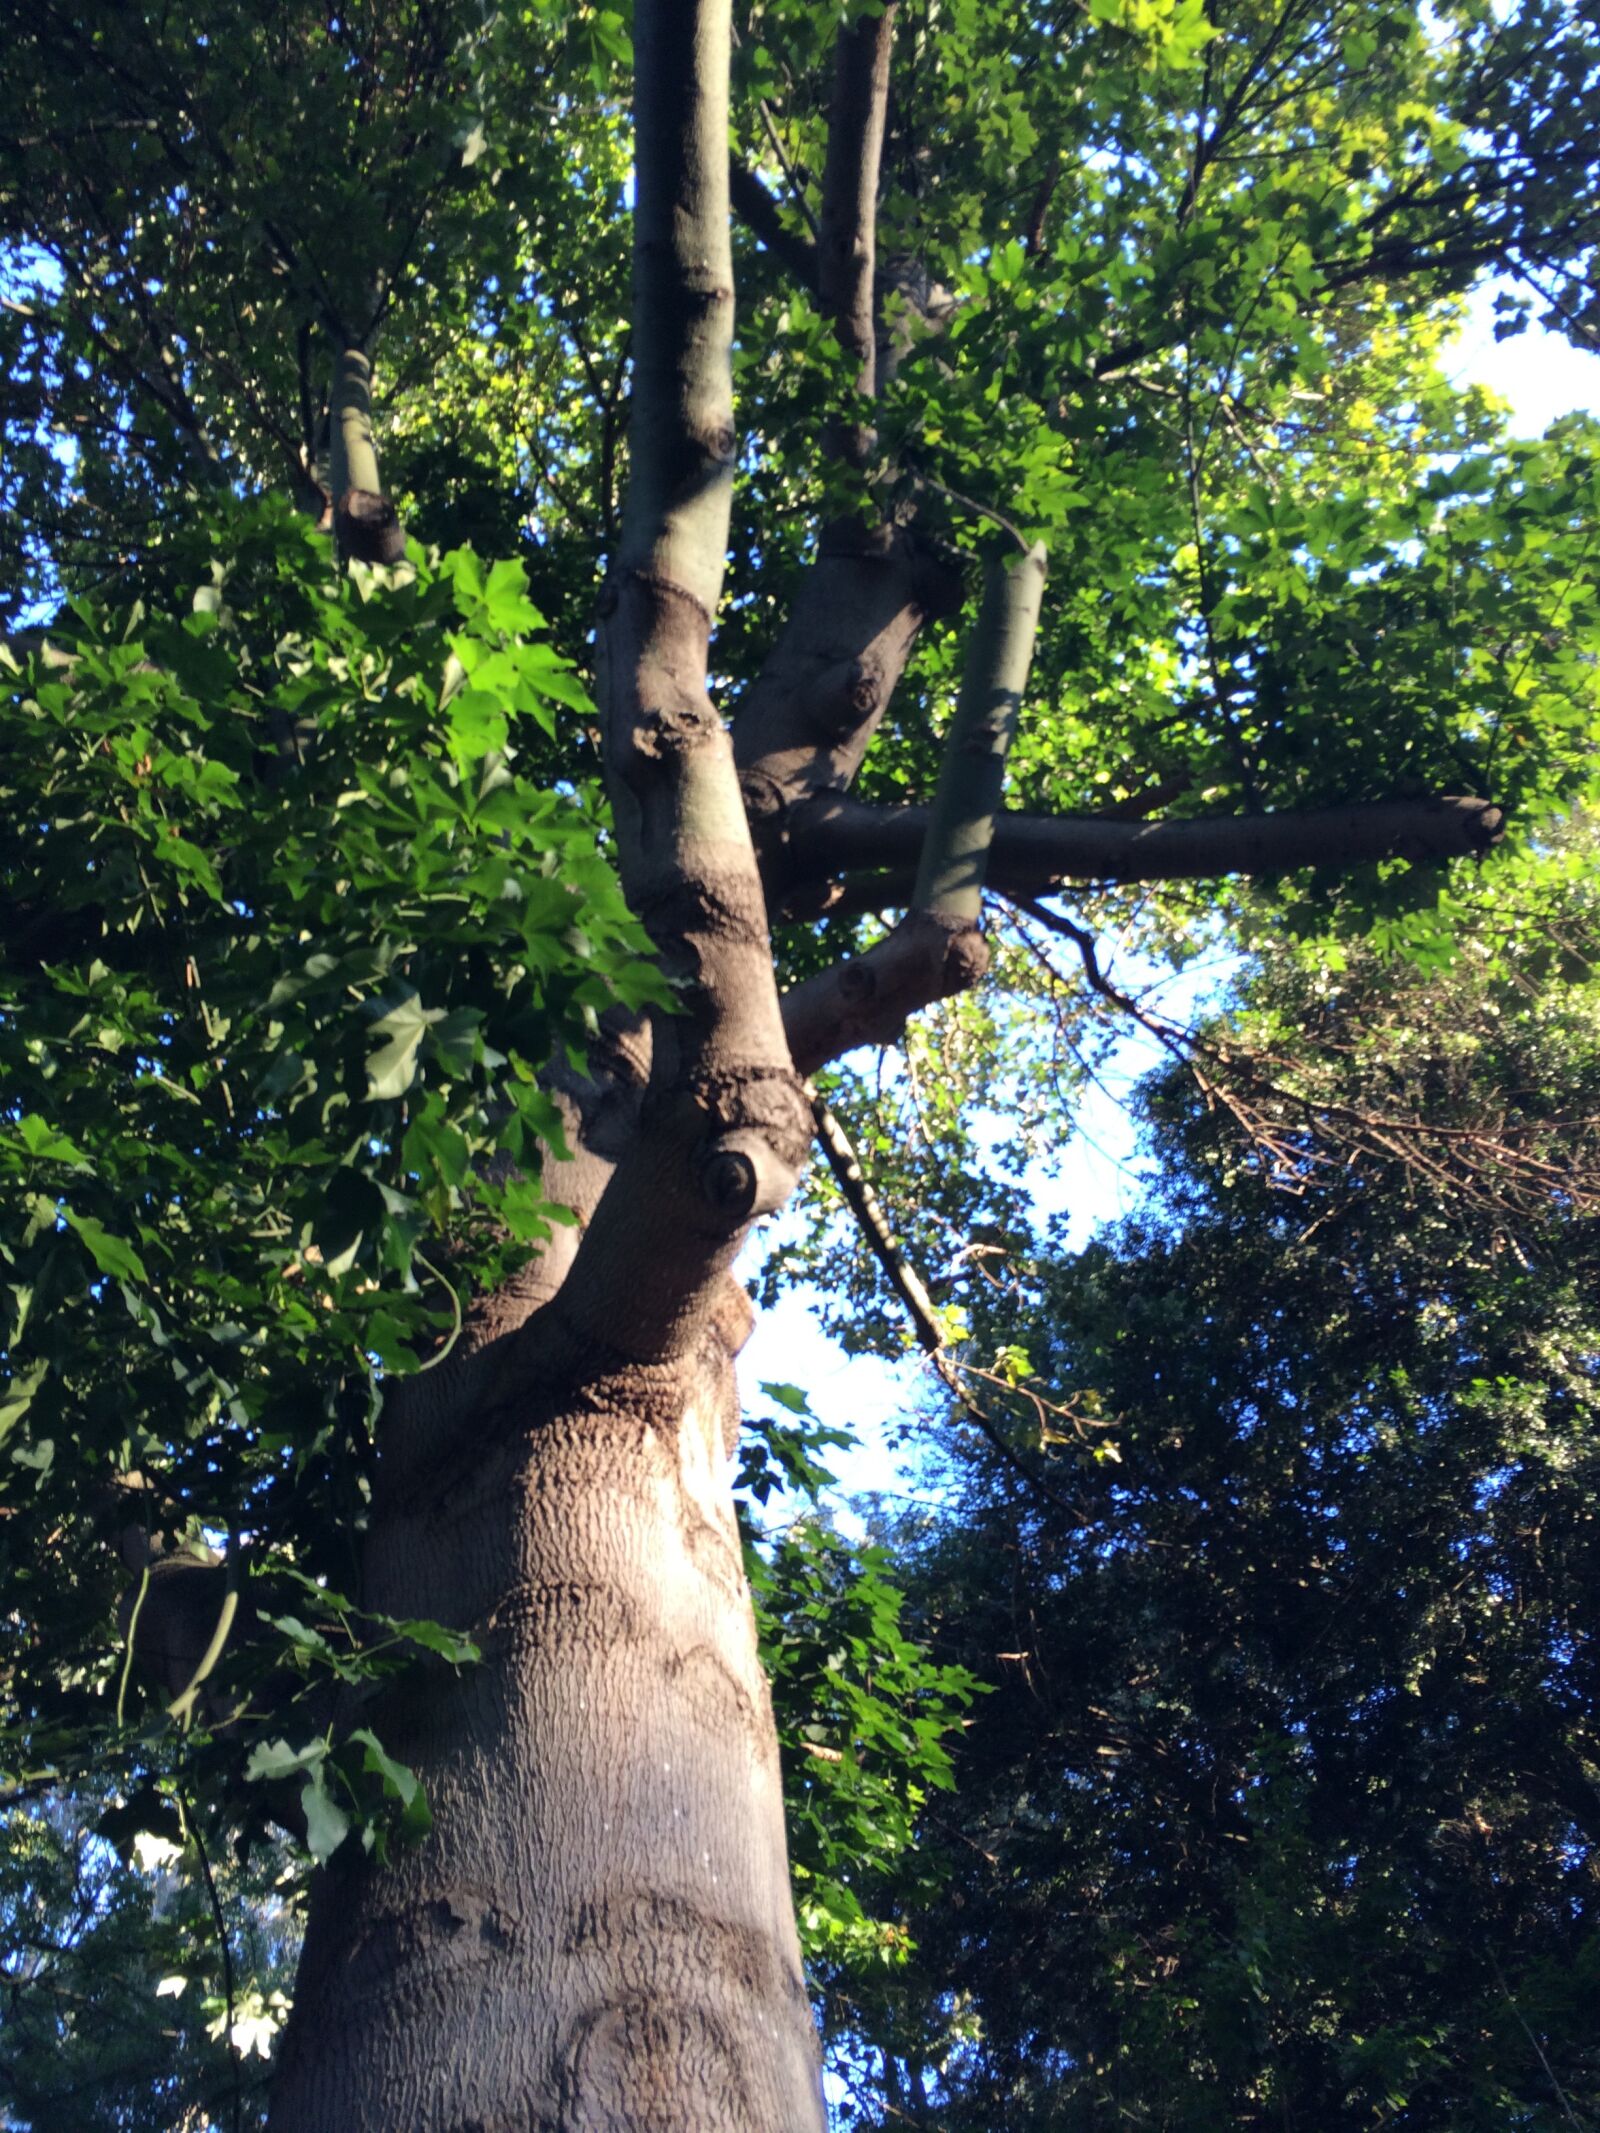 Apple iPhone 5s + iPhone 5s back camera 4.15mm f/2.2 sample photo. Tree, light, nature photography